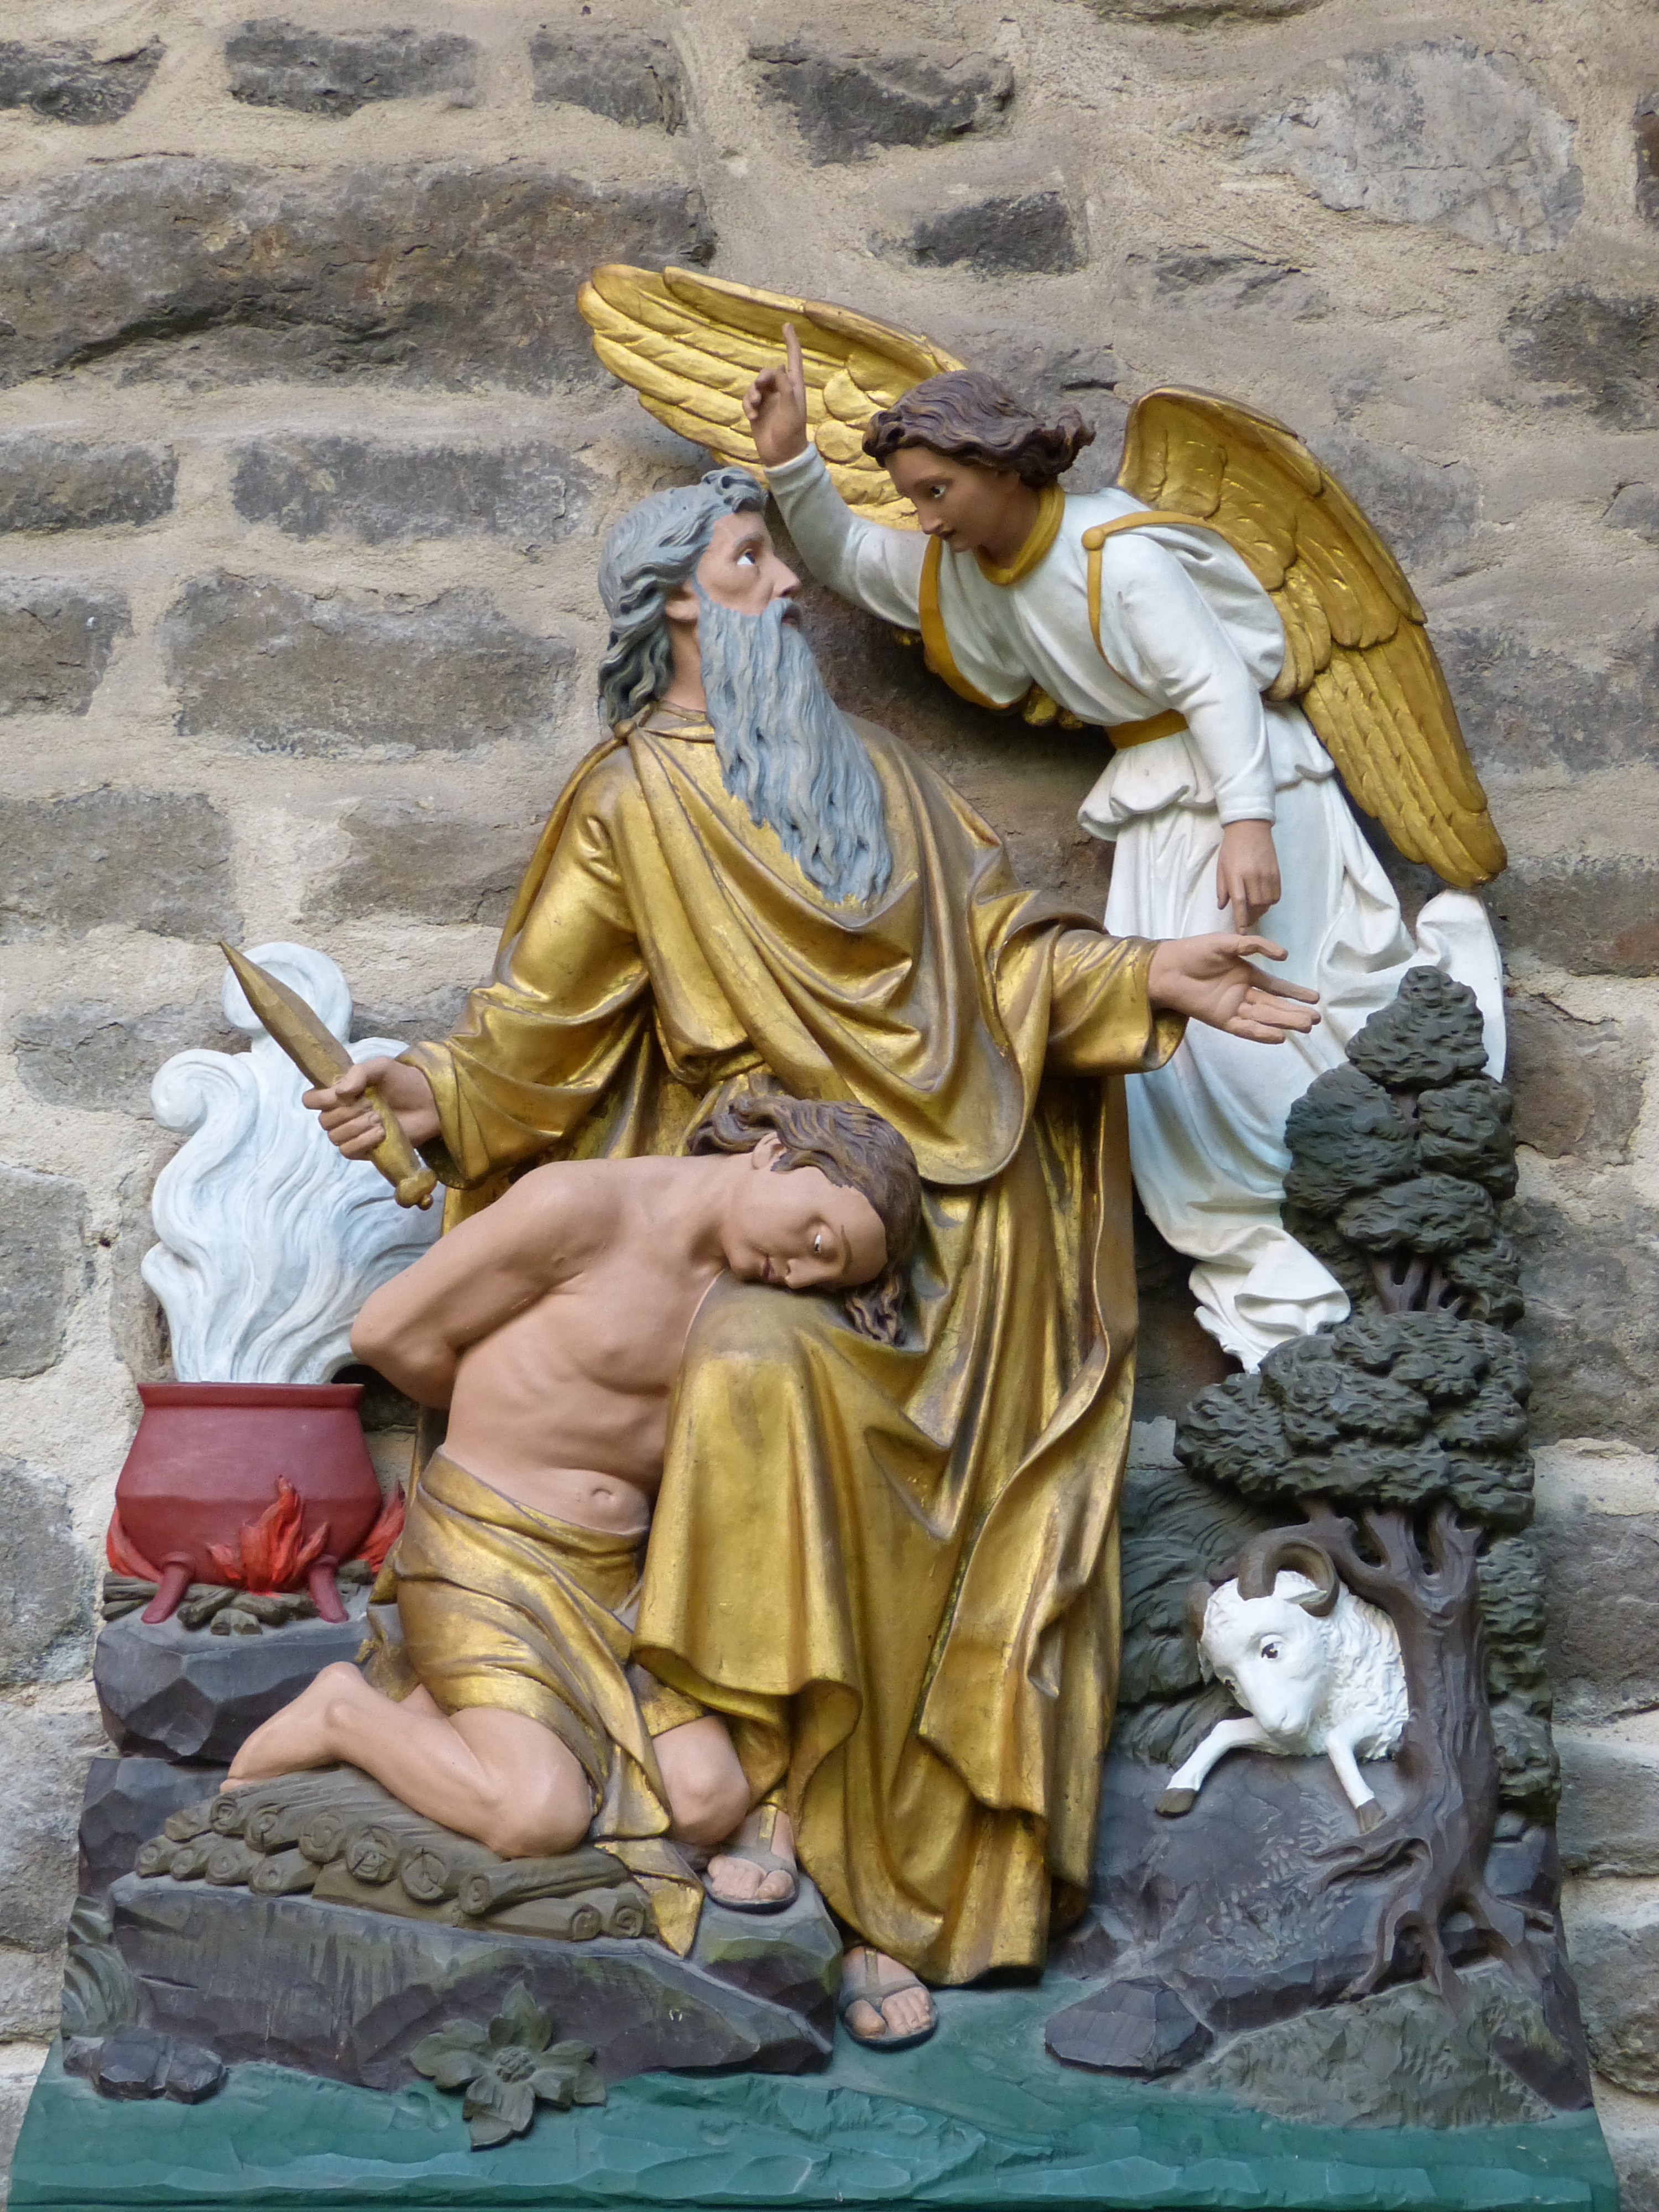 two religious men and angel figurines